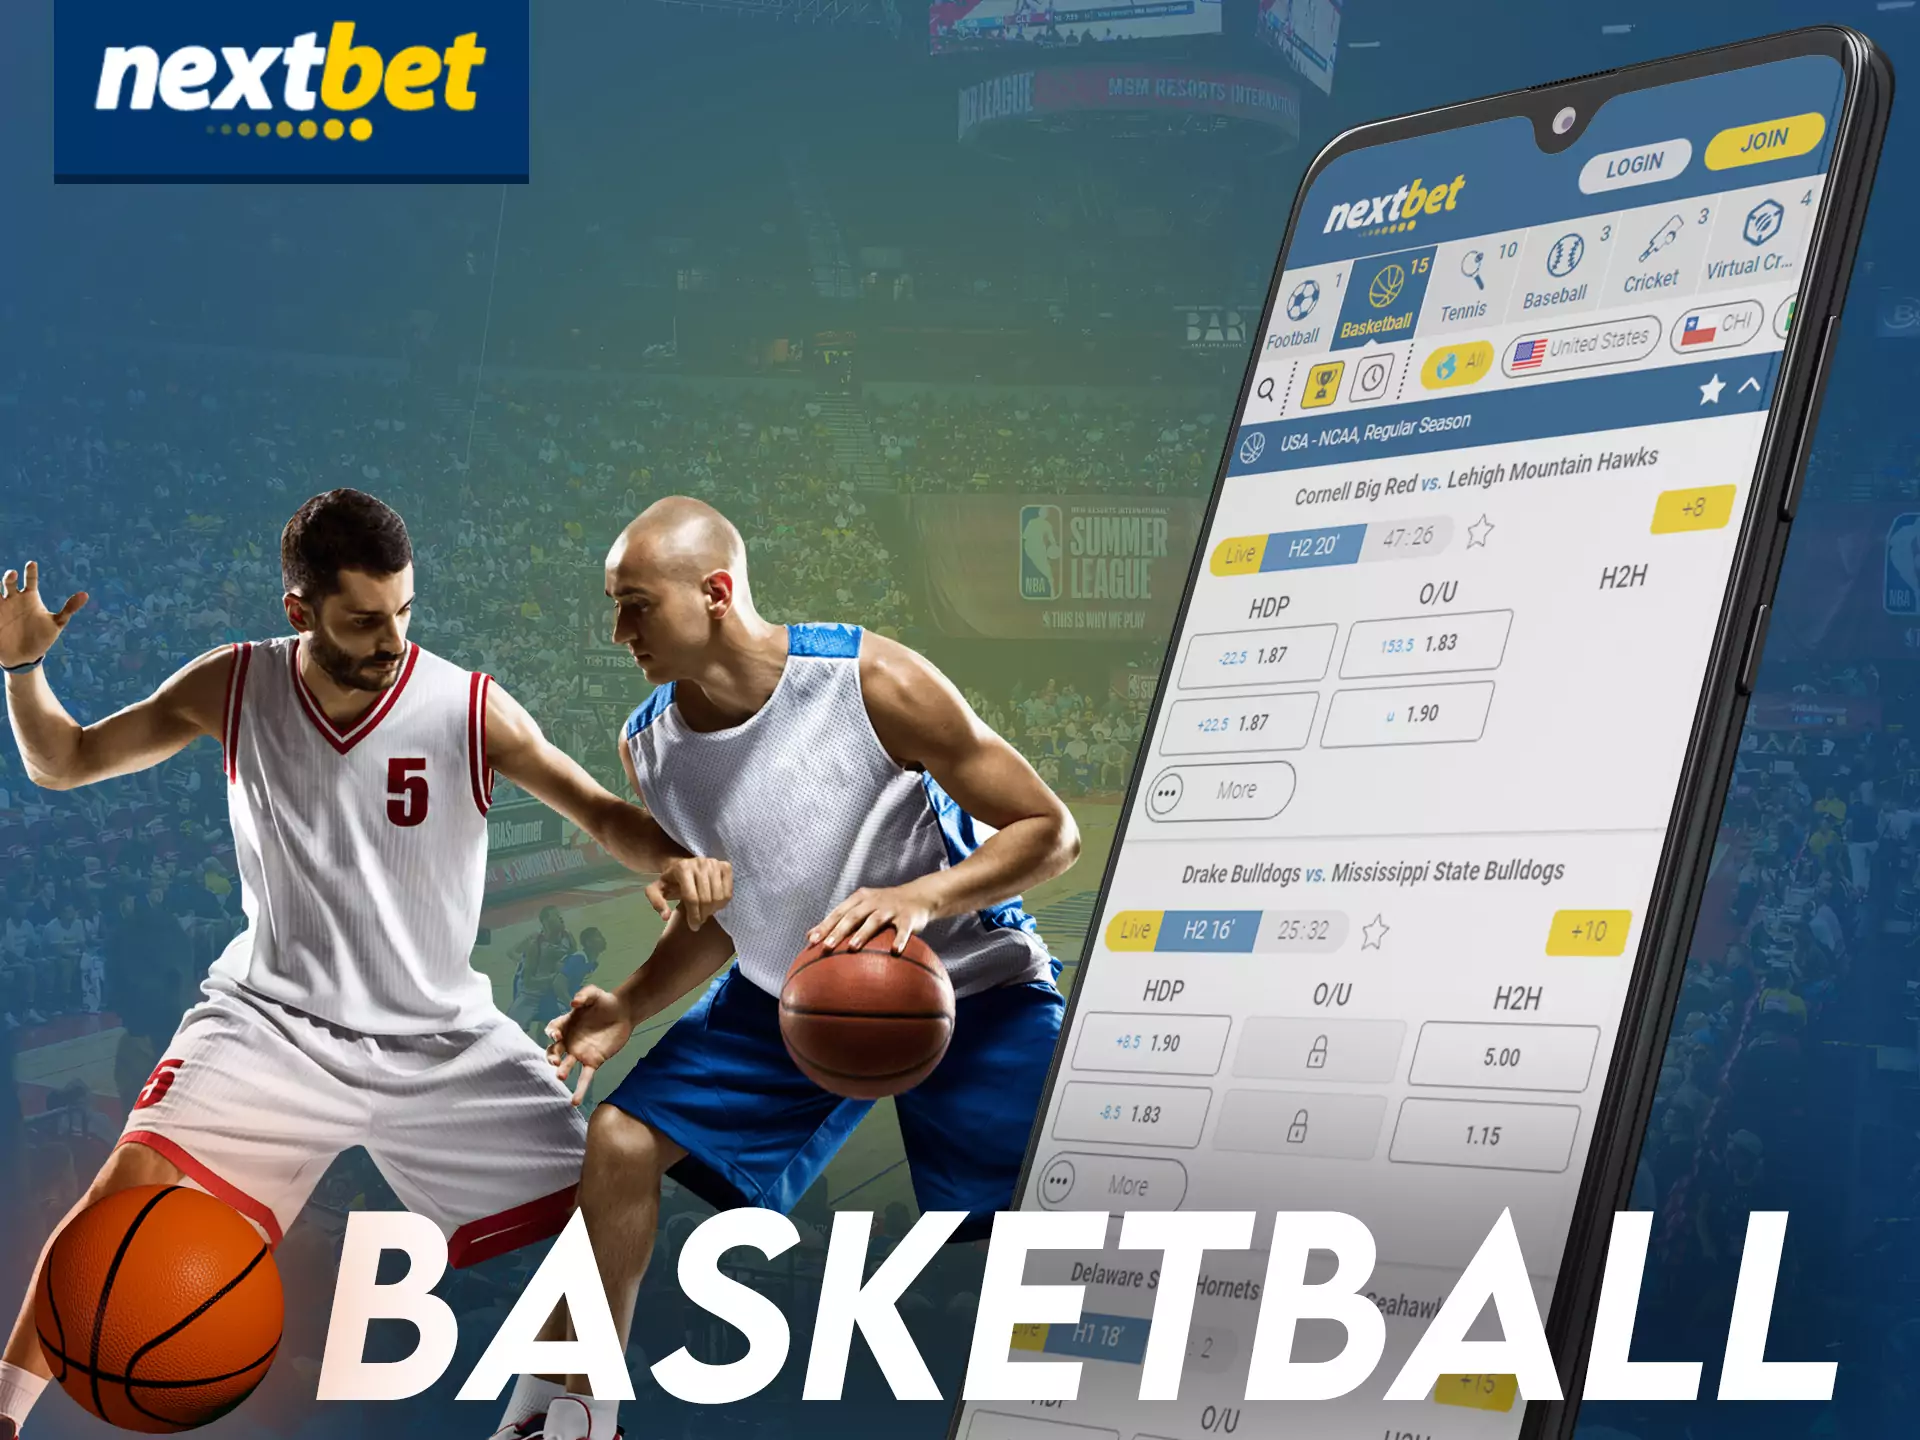 In the Nextbet app, you can bet on basketball.